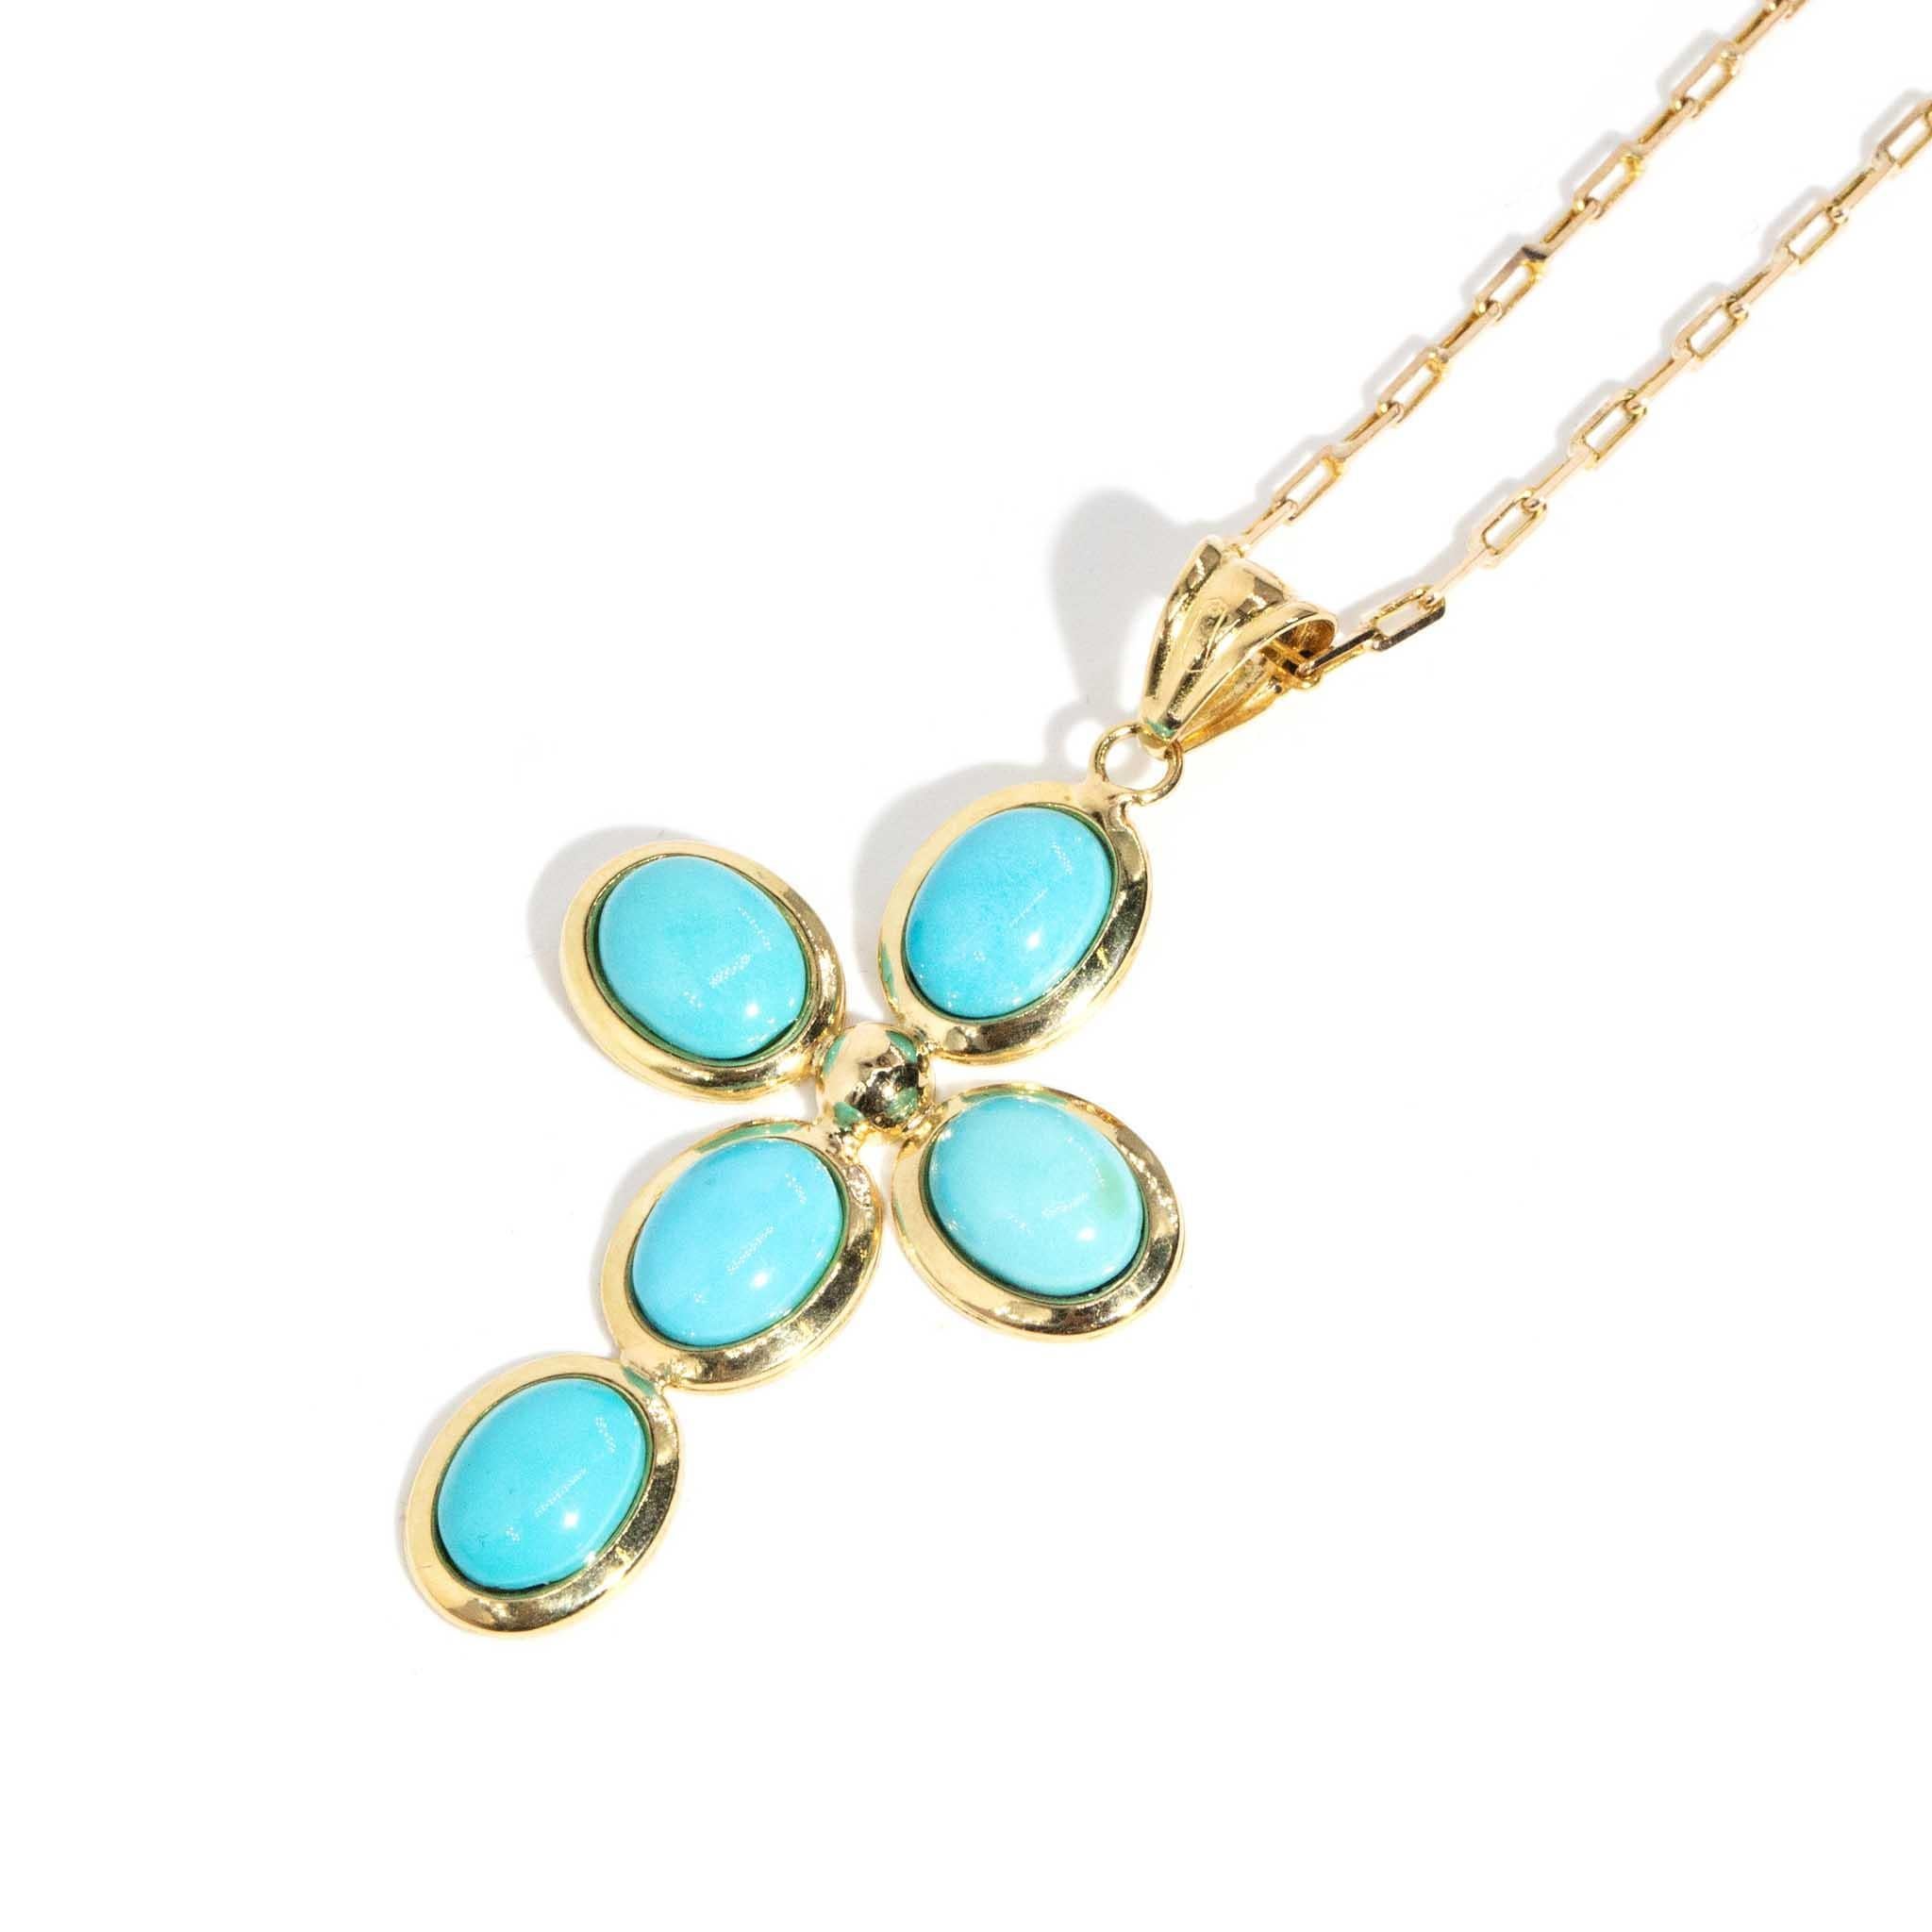 Modern Vintage Circa 1990s Turquoise Cabochon Pendant & Chain 14 Carat Yellow Gold For Sale